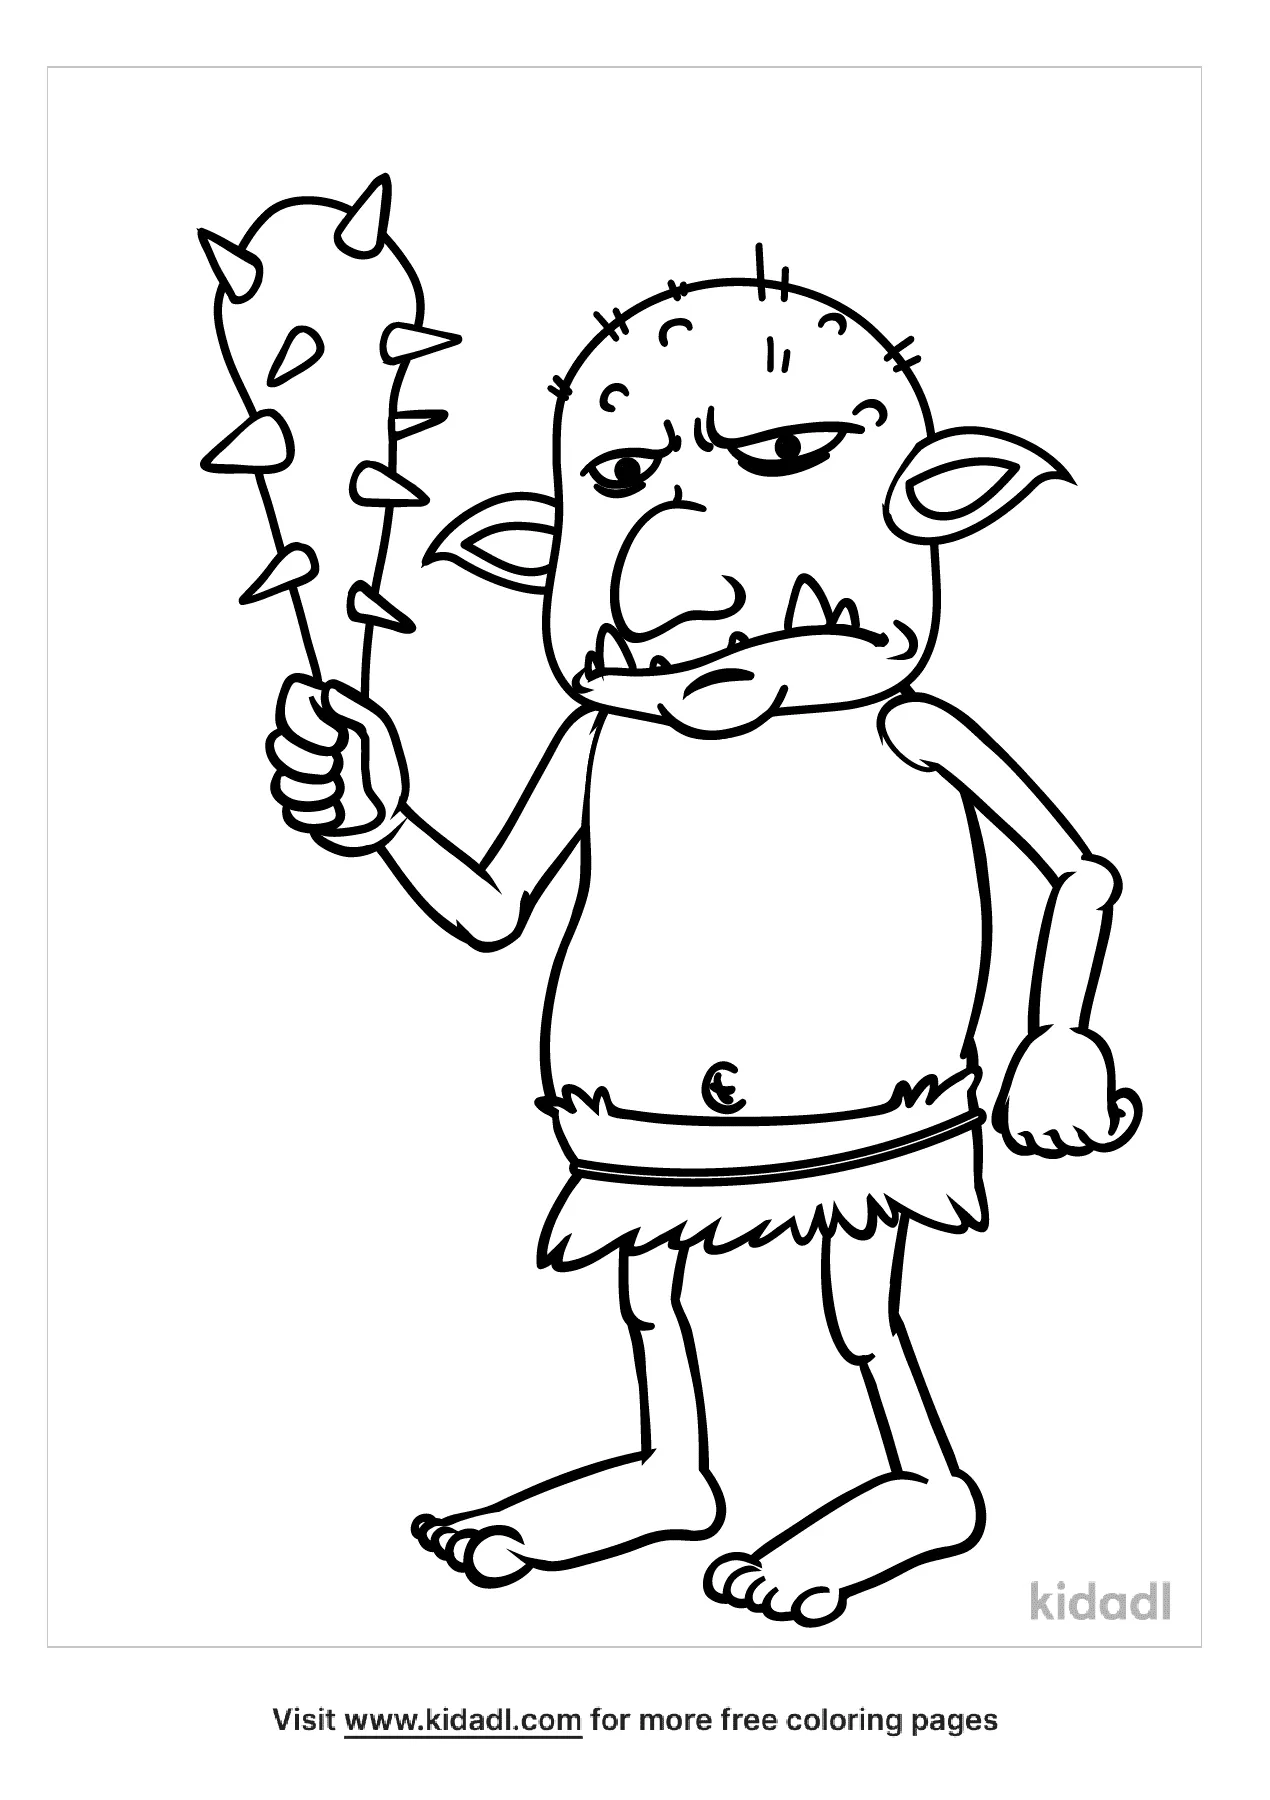 Free goblin coloring page coloring page printables